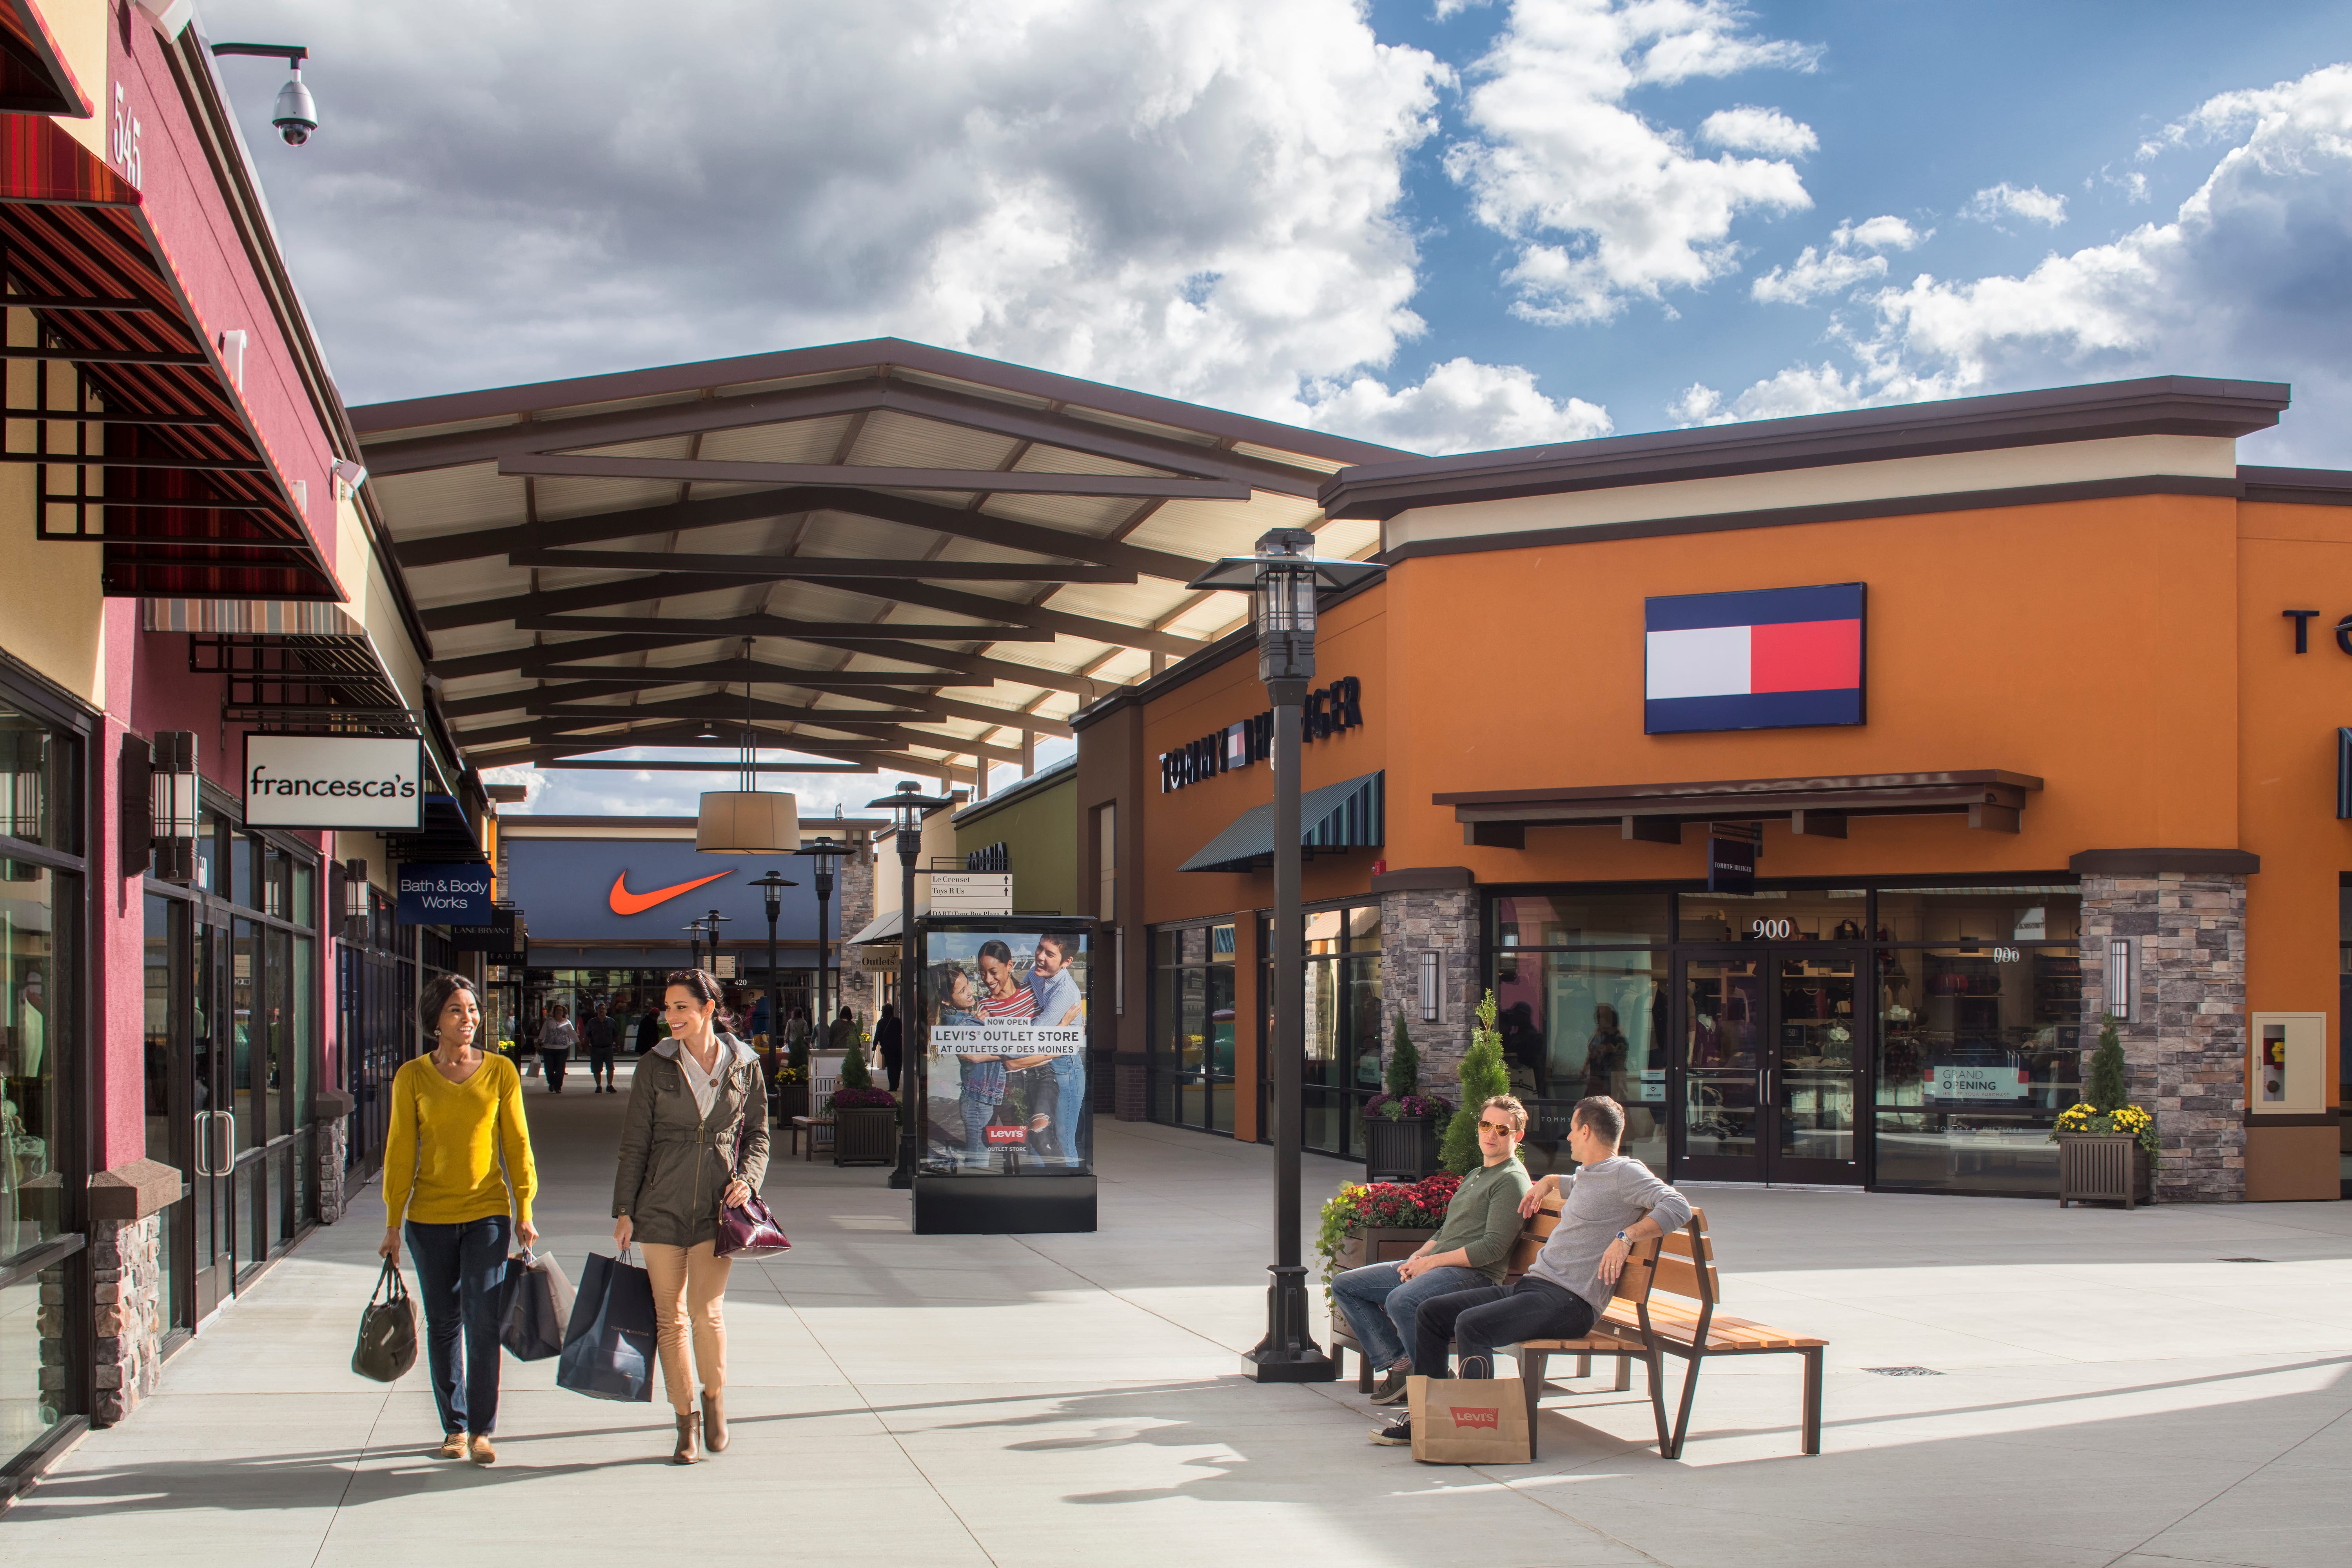 mogelijkheid Ook Bakkerij Coach Outlet to open at Outlets of Des Moines in the fall